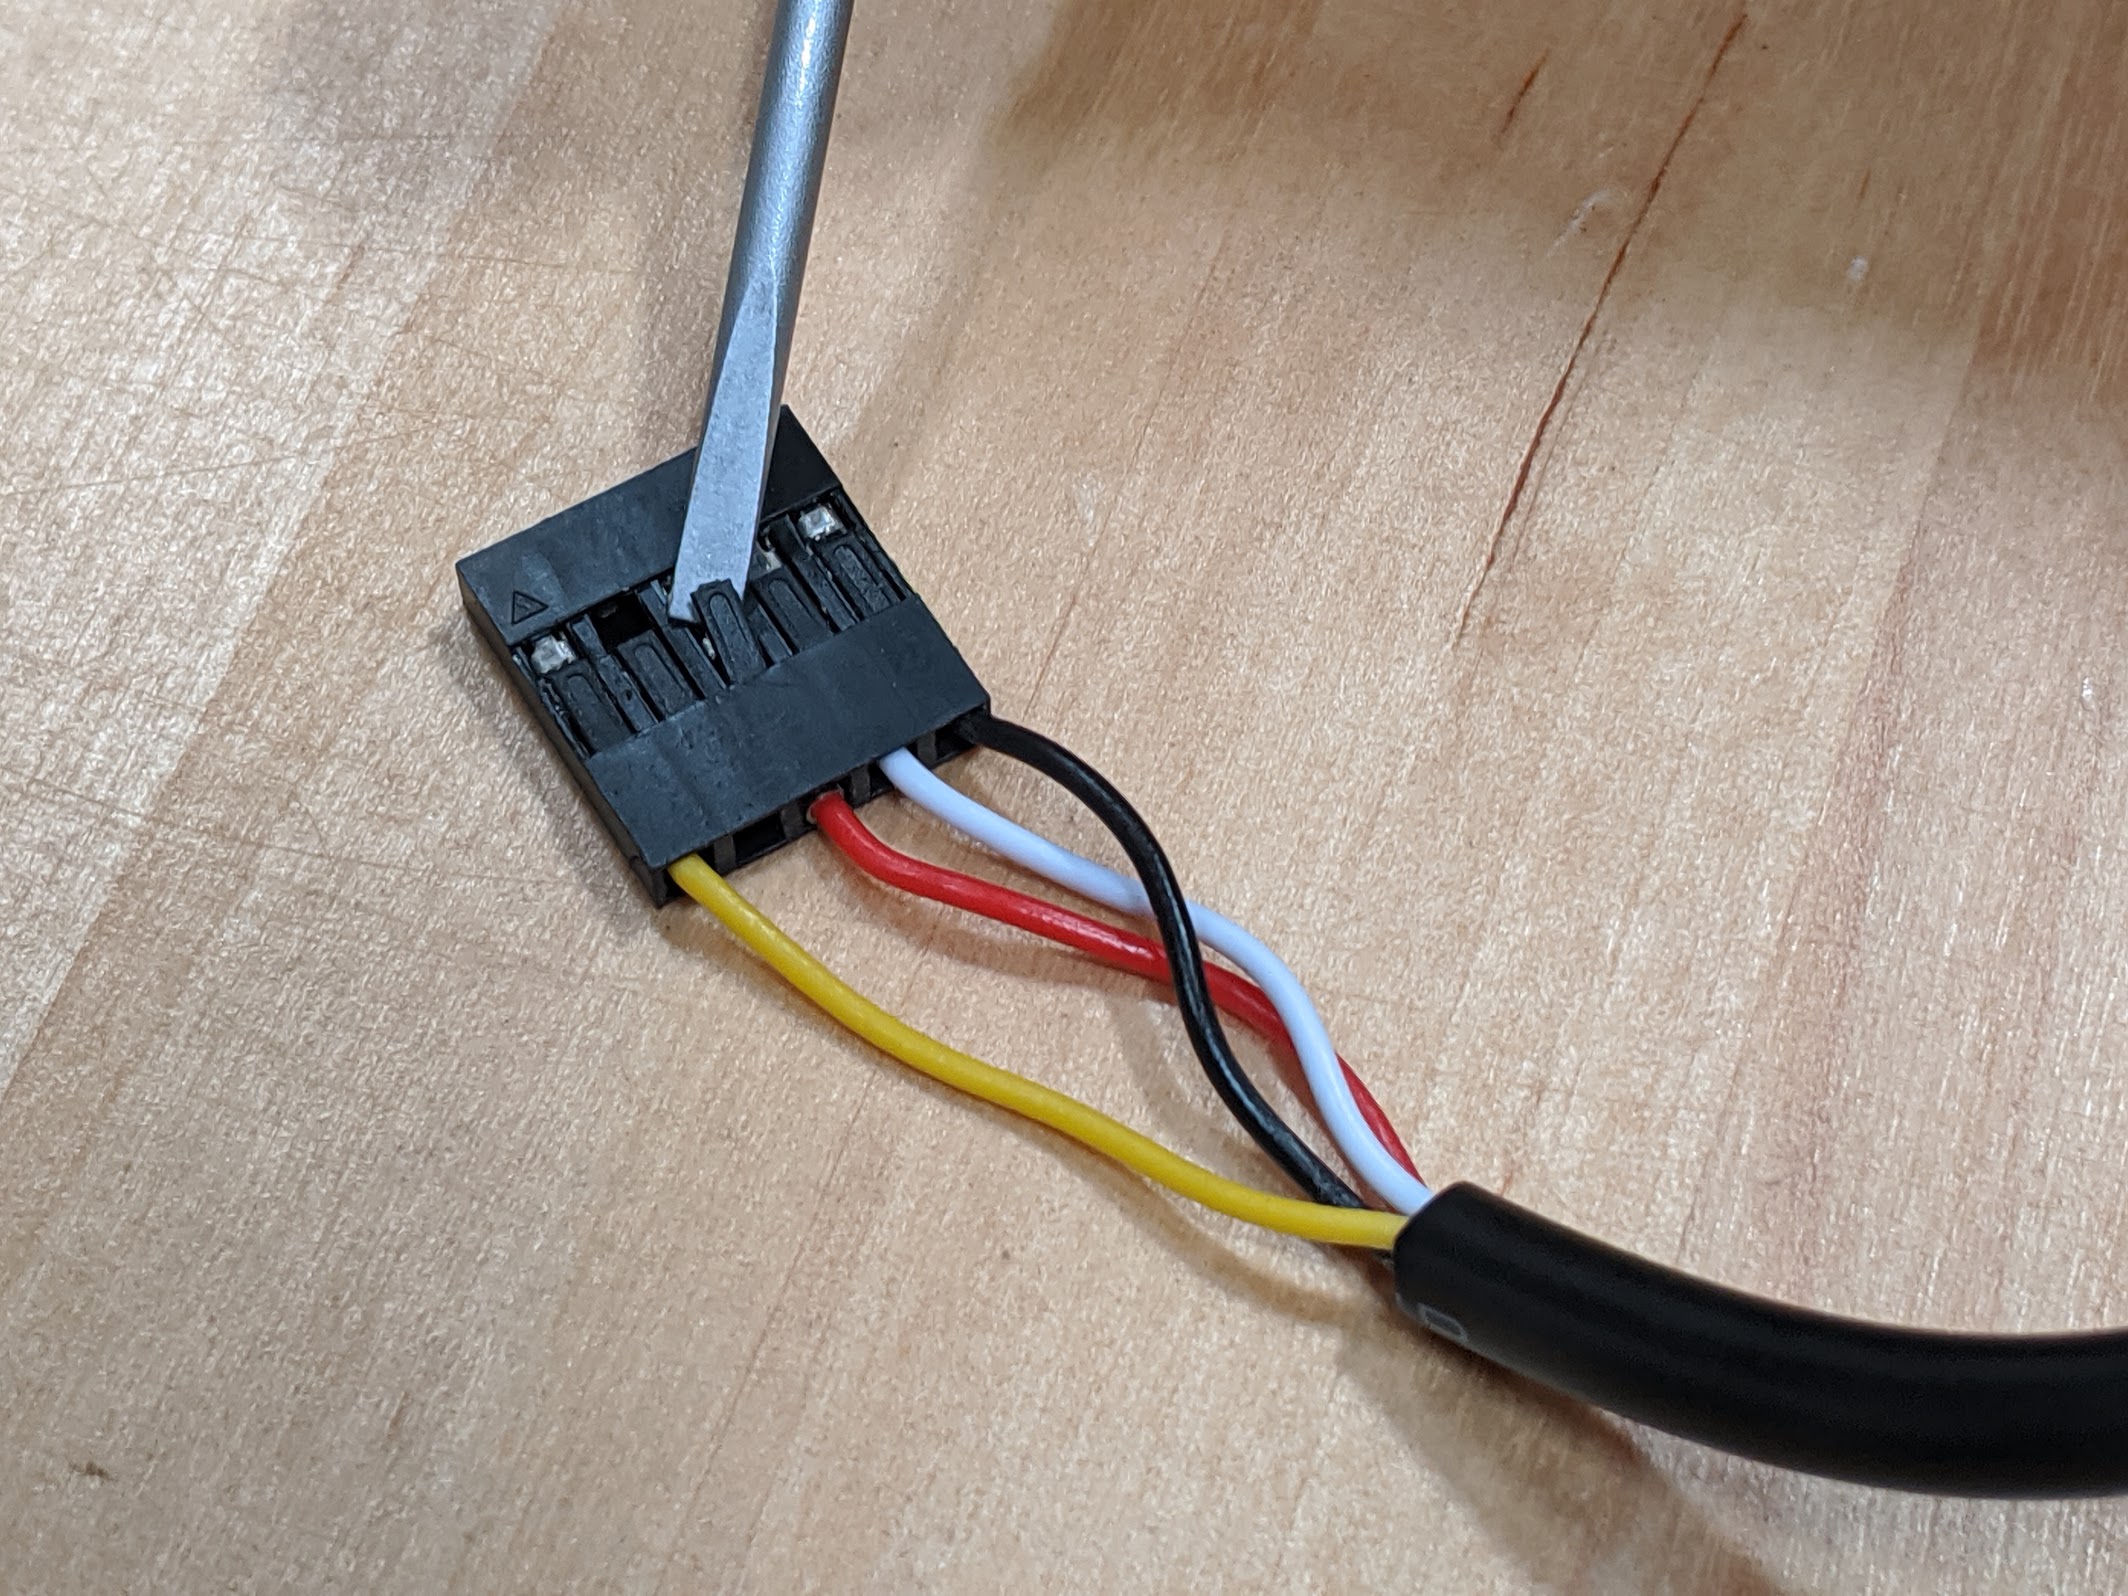 lift black plastic tab for red wire